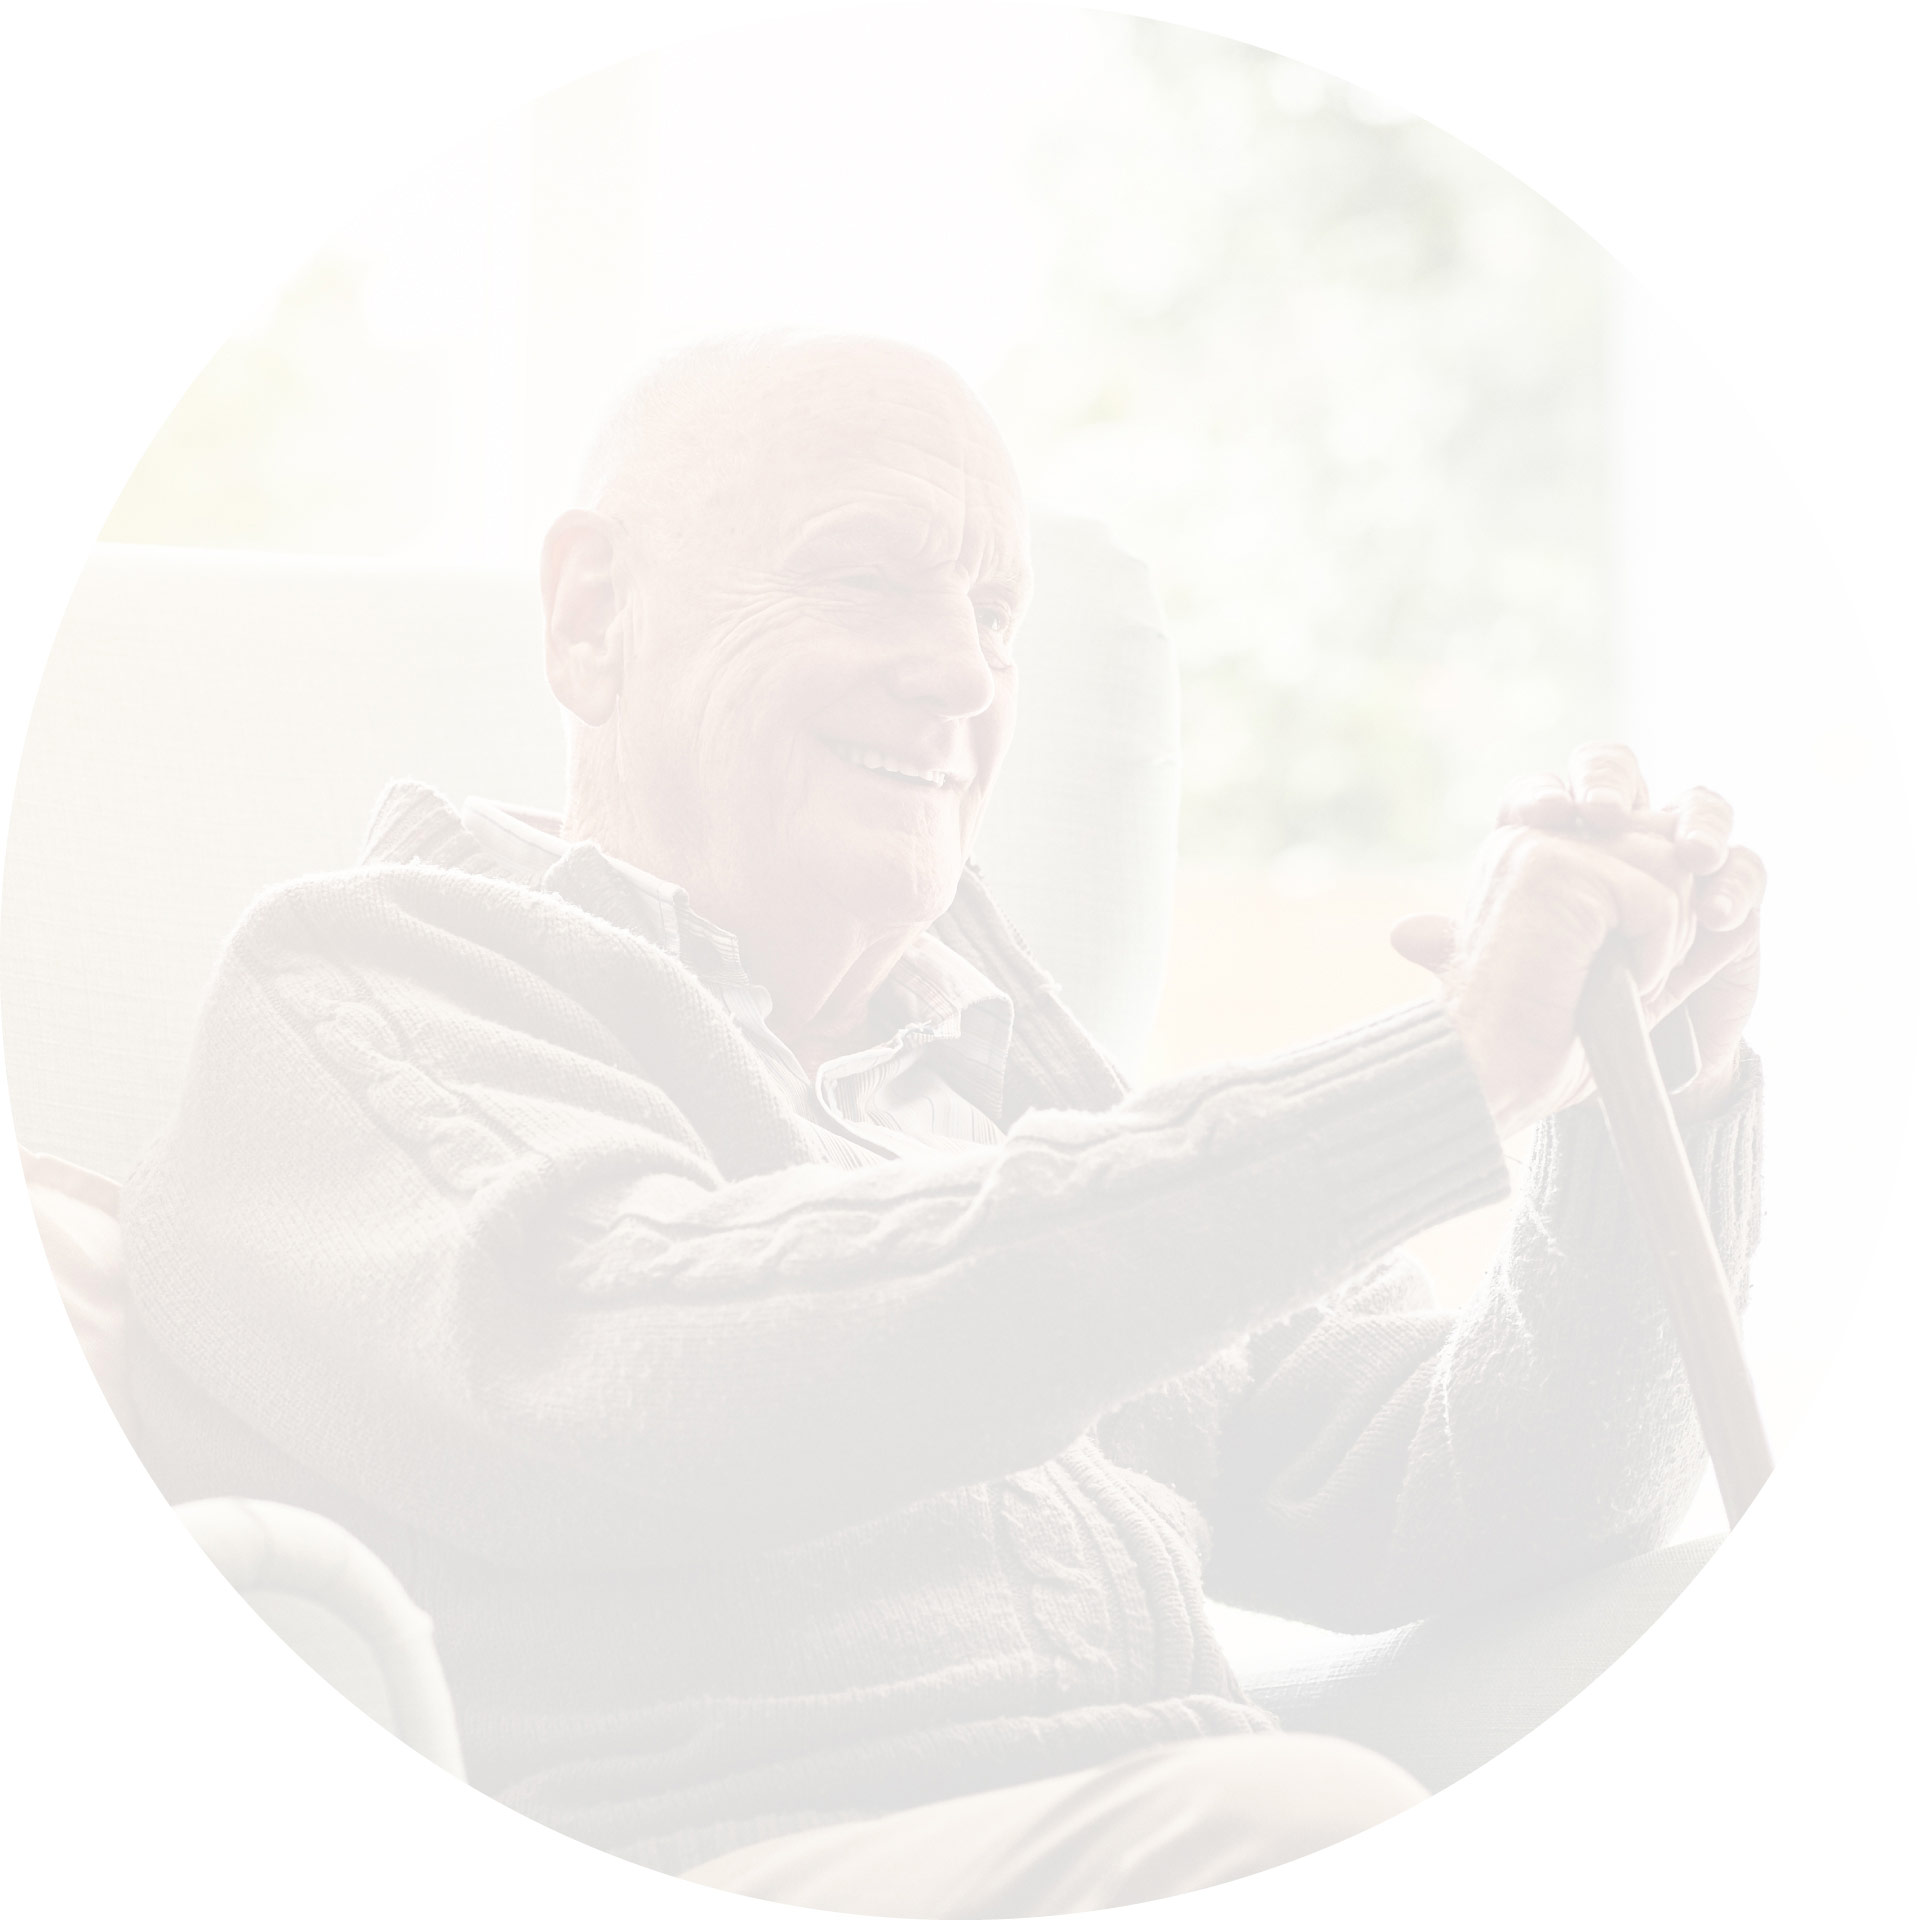 An elderly man happy to have domiciliary care services looking after him